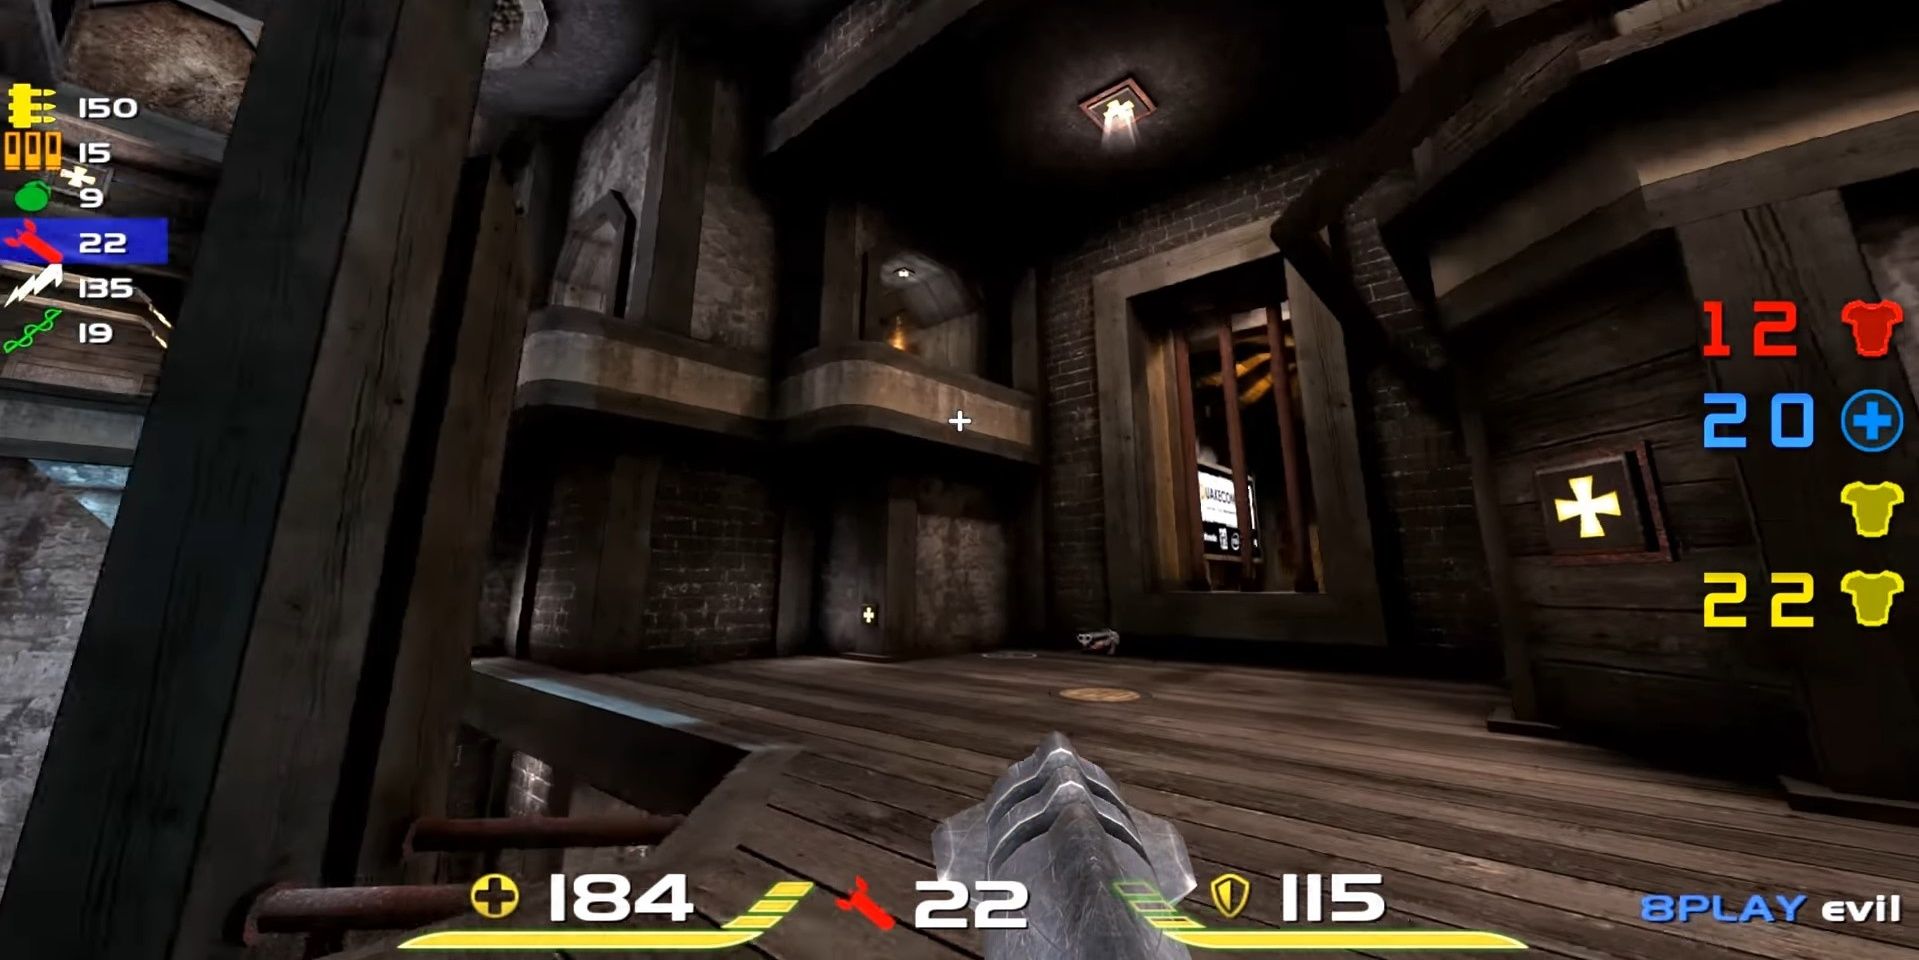 A player using the rocket launcher in Quake Live